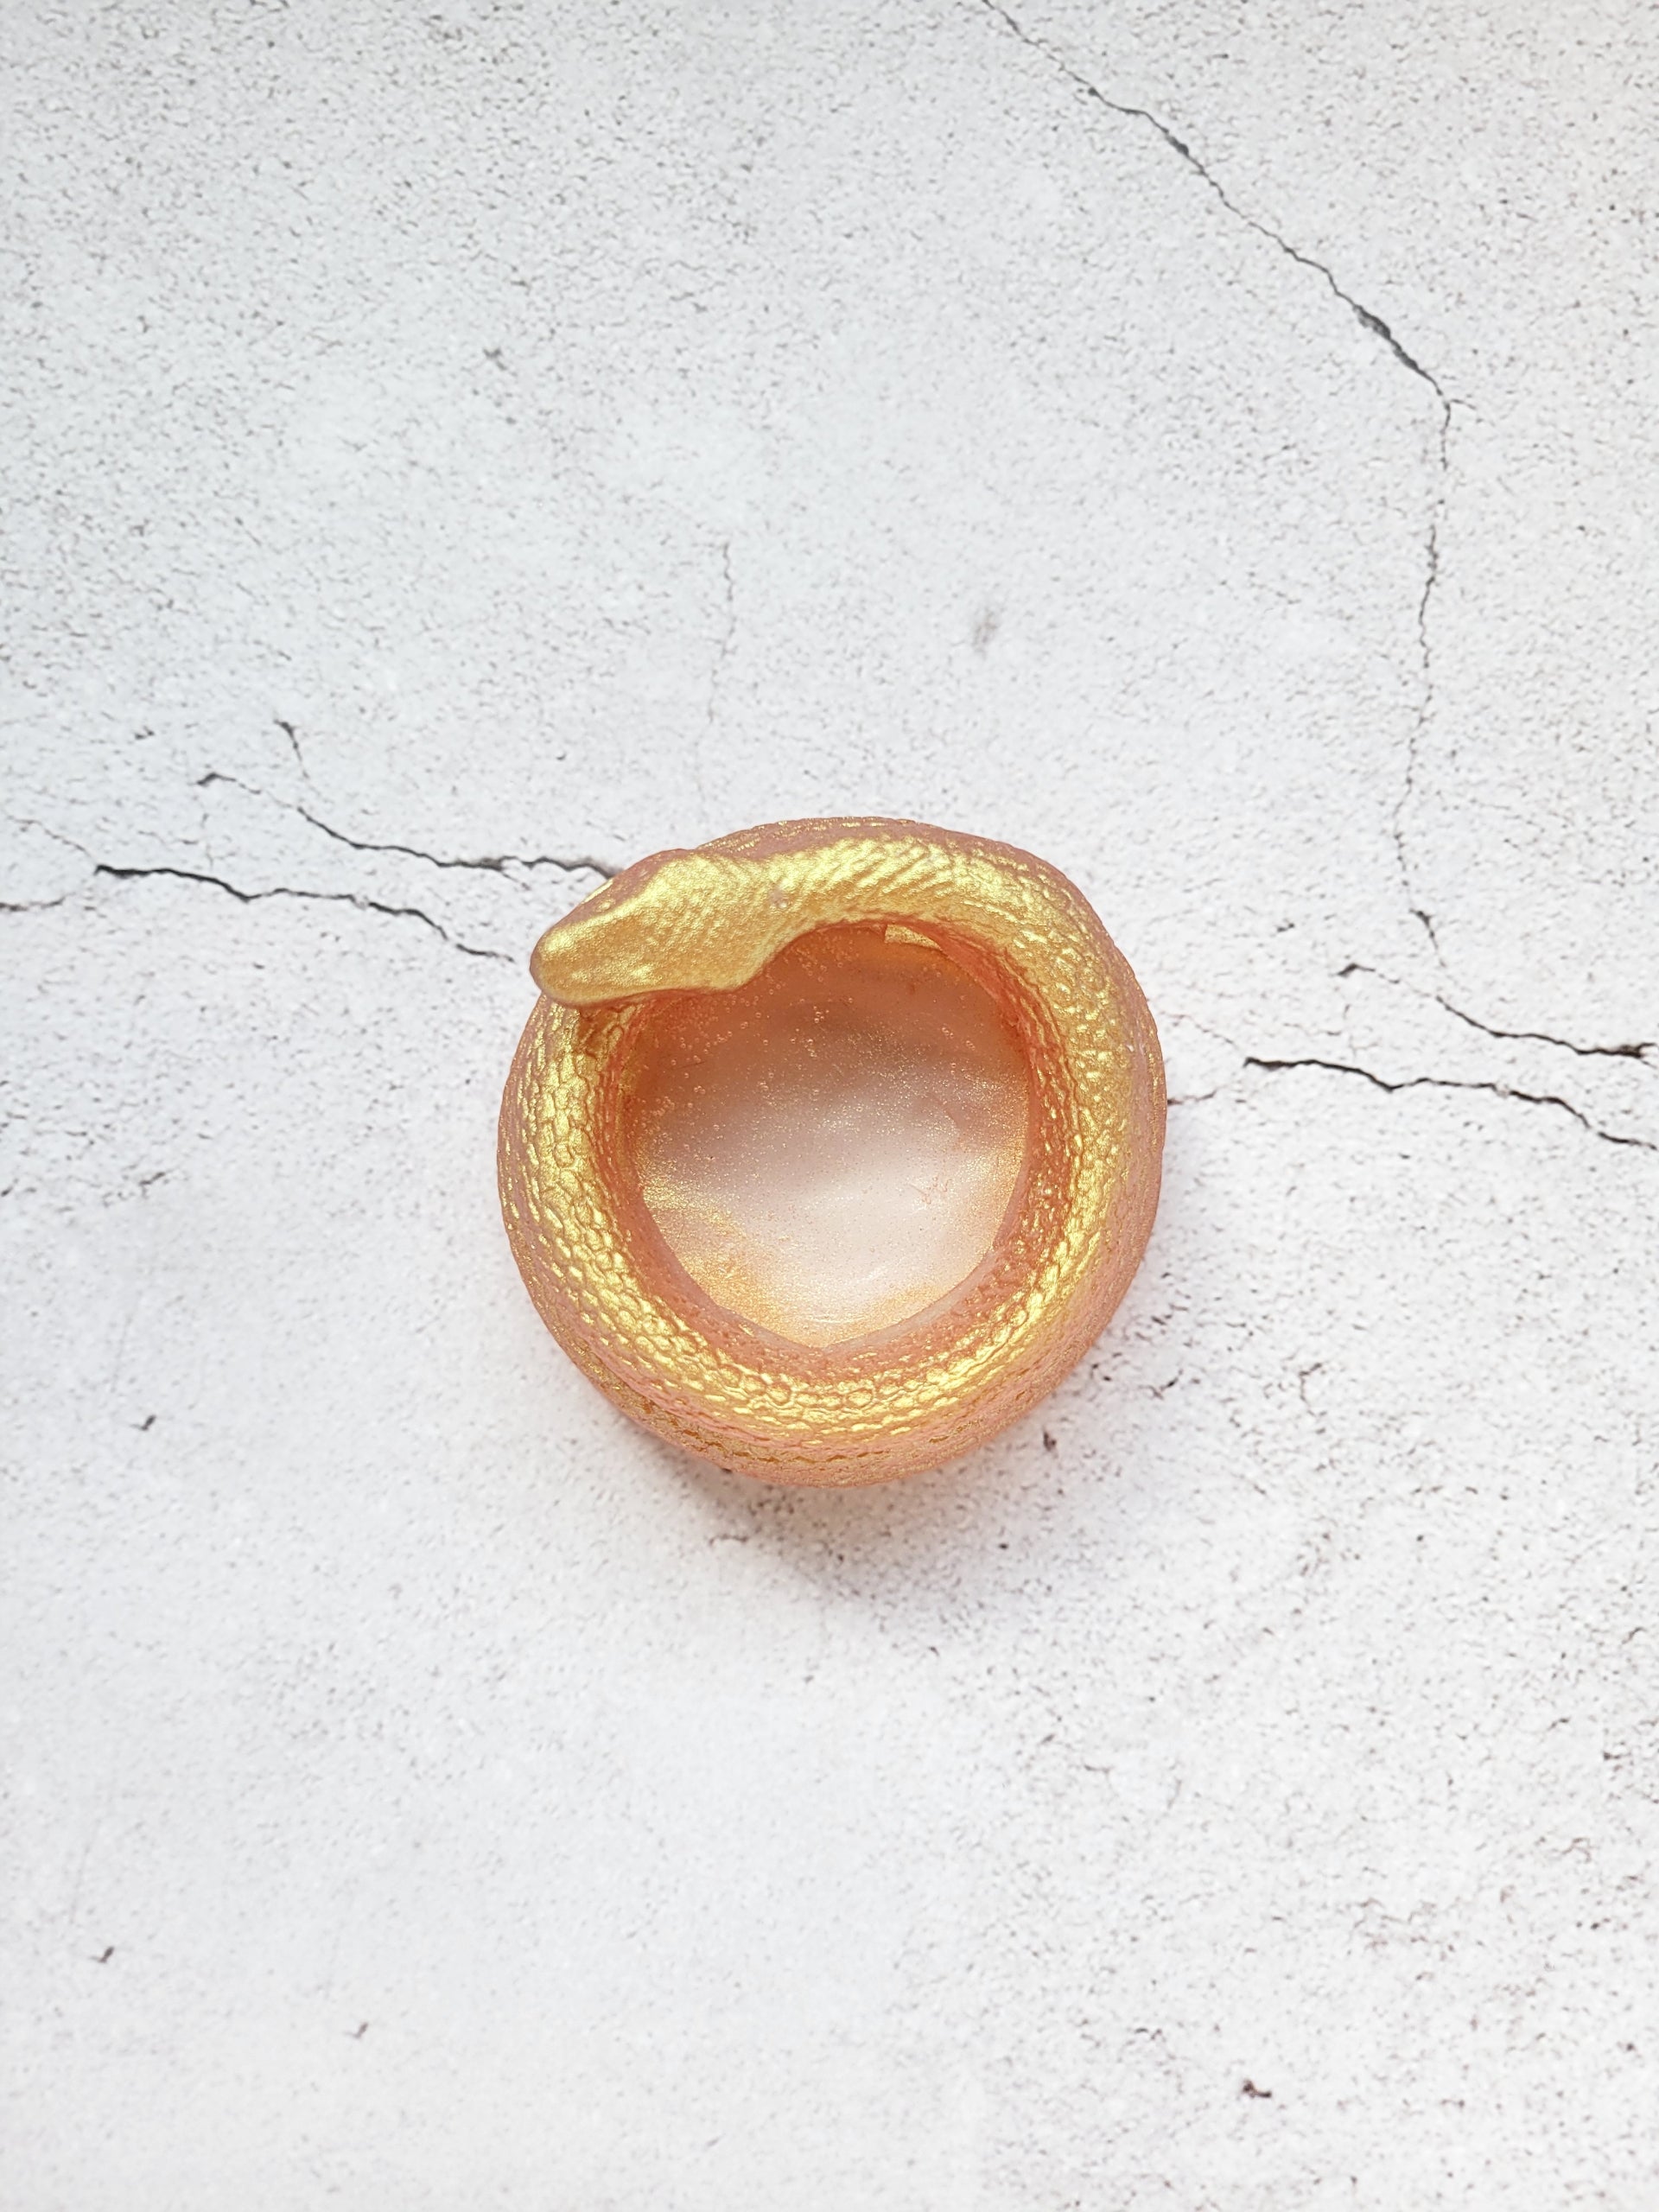 A top view of a tealight candle holder in the style of a coiled snake. It's a shimmering gold color.